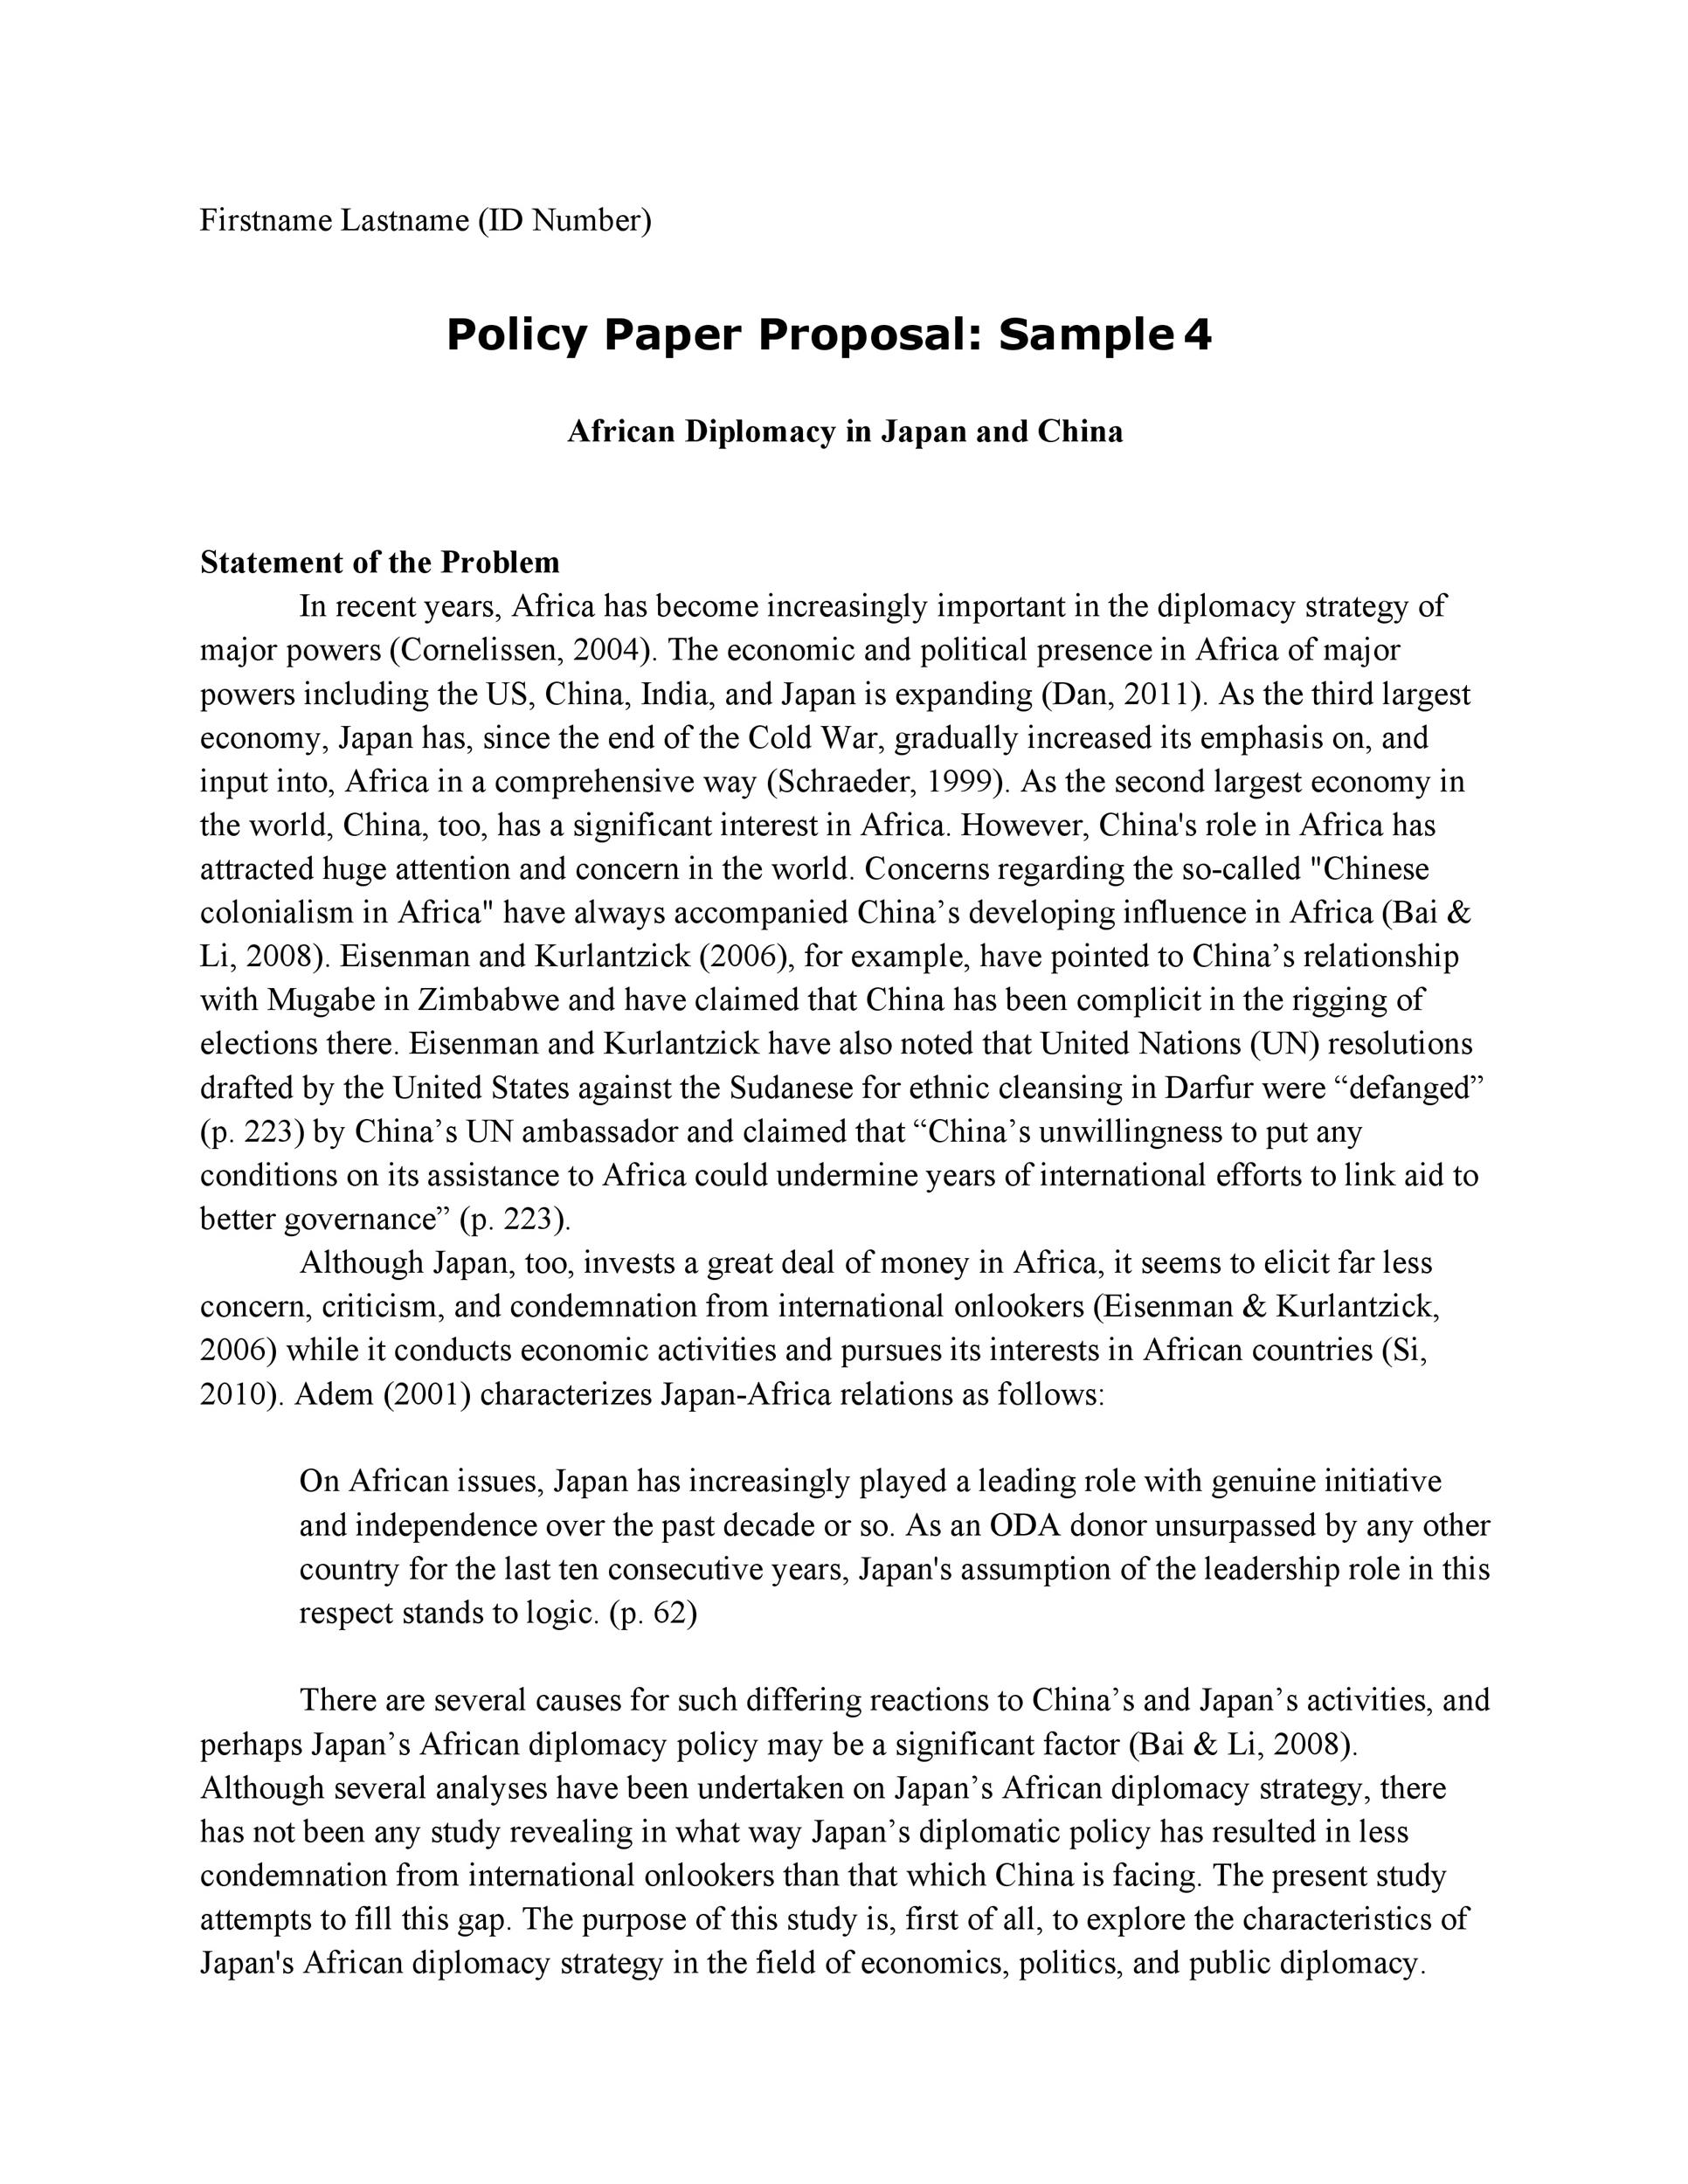 16 Professional Policy Proposal Templates [& Examples] ᐅ TemplateLab